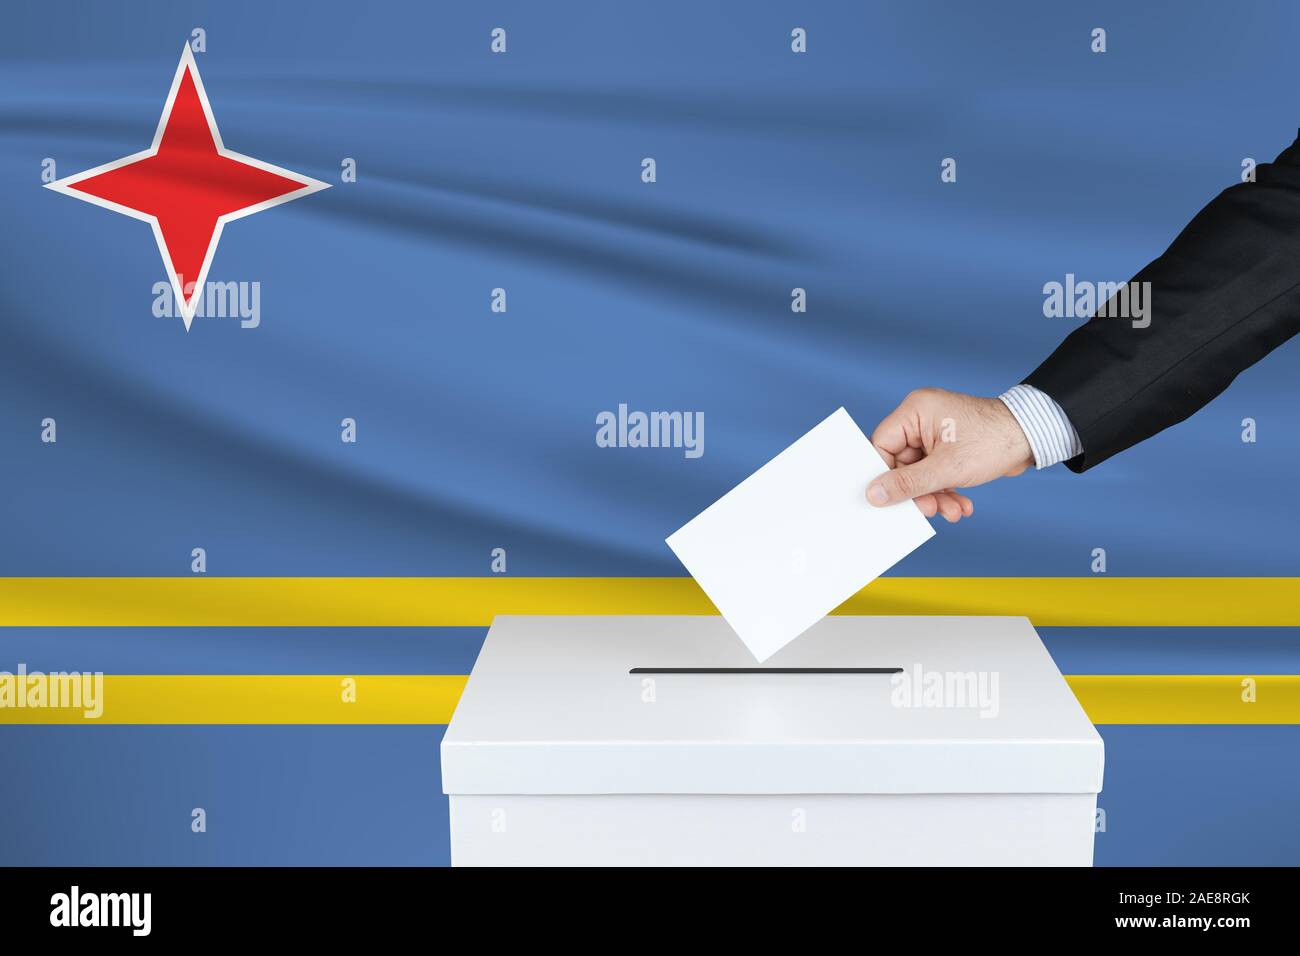 Election in Aruba. The hand of man putting his vote in the ballot box. Waved Aruba flag on background. Stock Photo